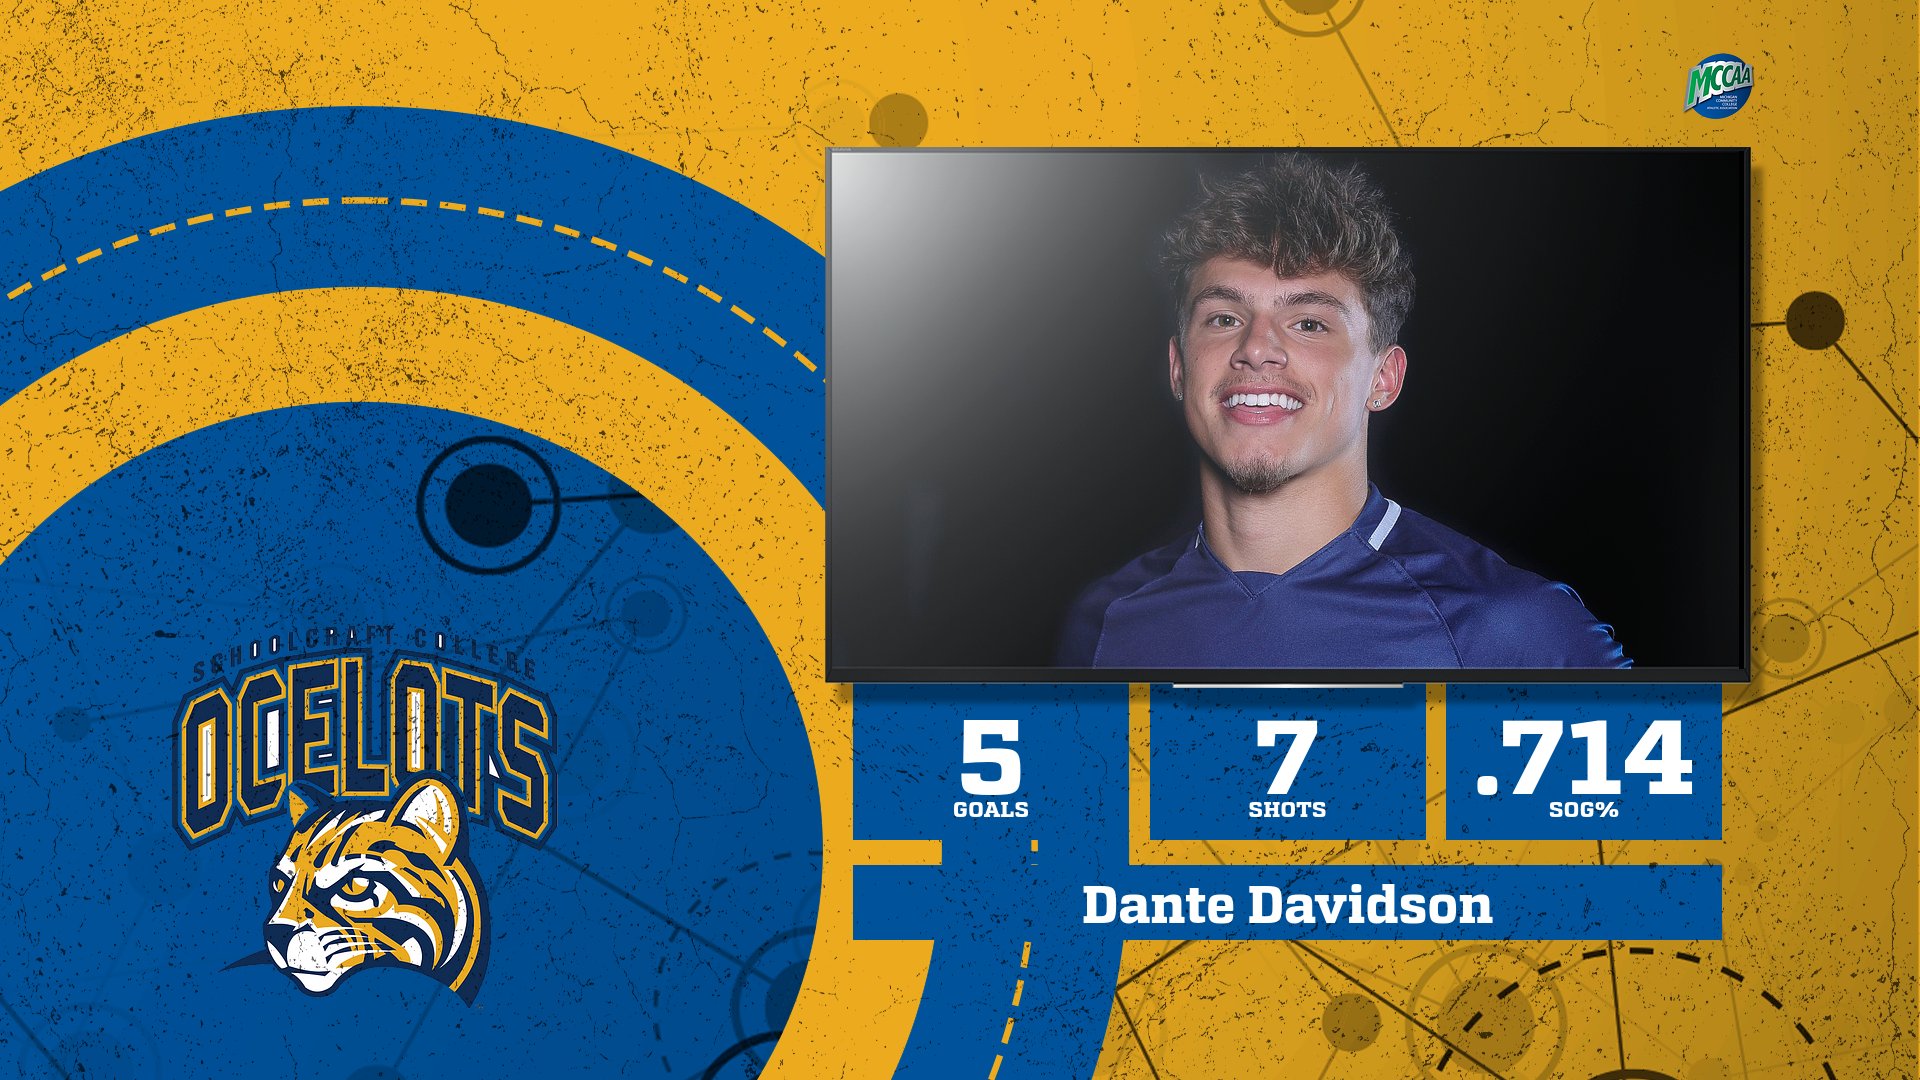 Dante Davidson, Schoolcraft College, is the MCCAA Men's Soccer Player of the Week#6